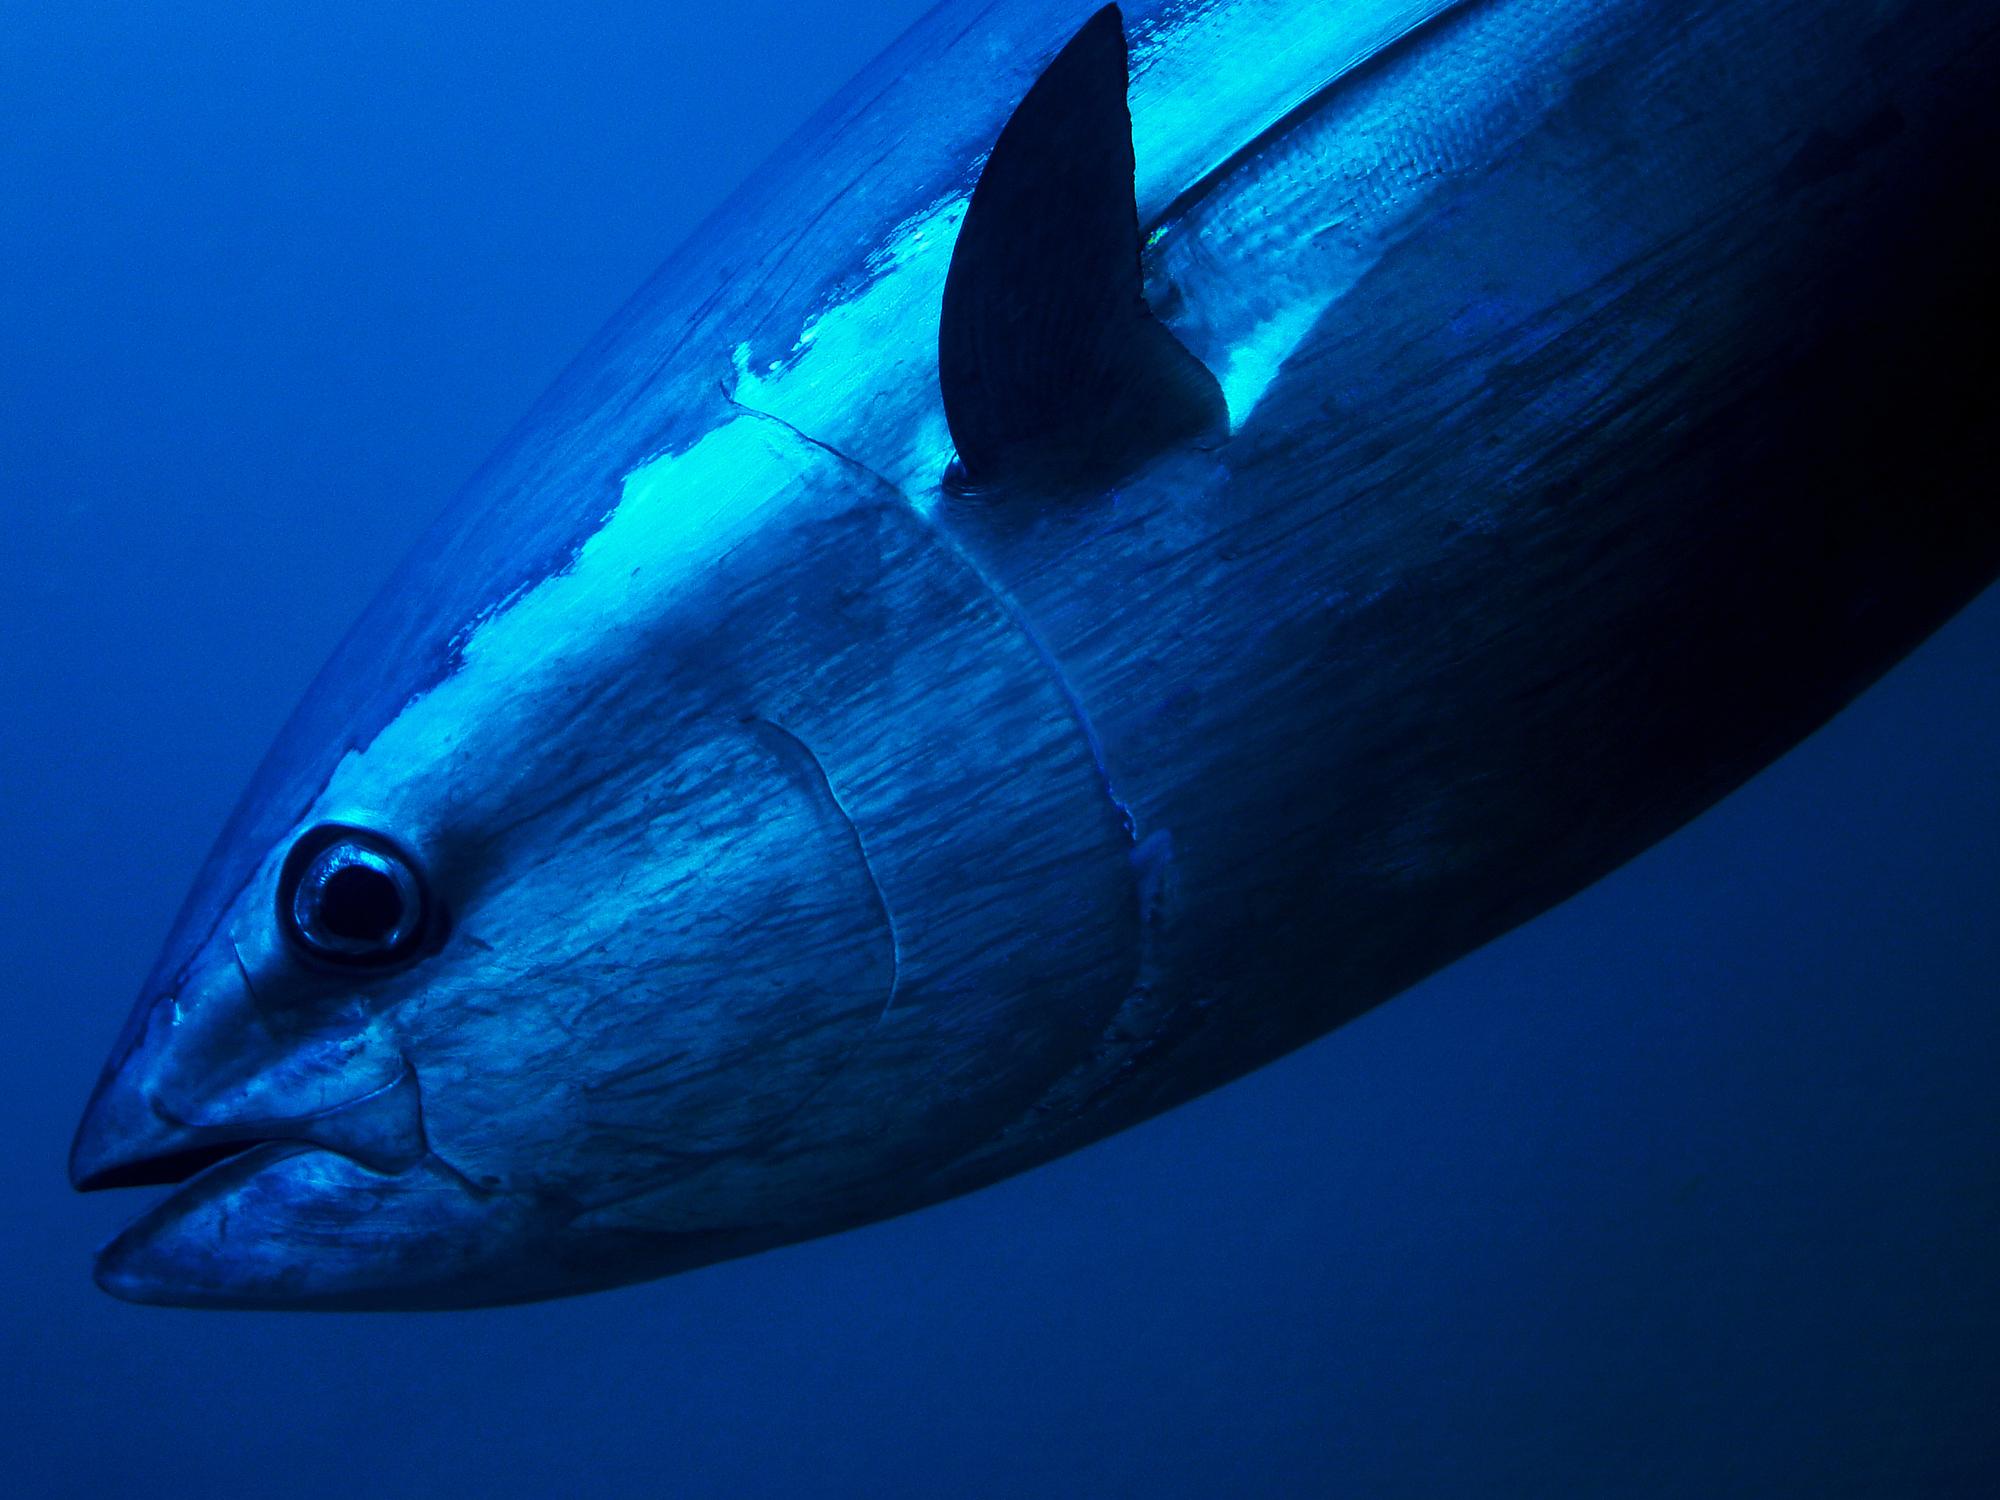 Bluefin tuna are increasingly being sighted in British waters, and anglers say it is time to start fishing for them again